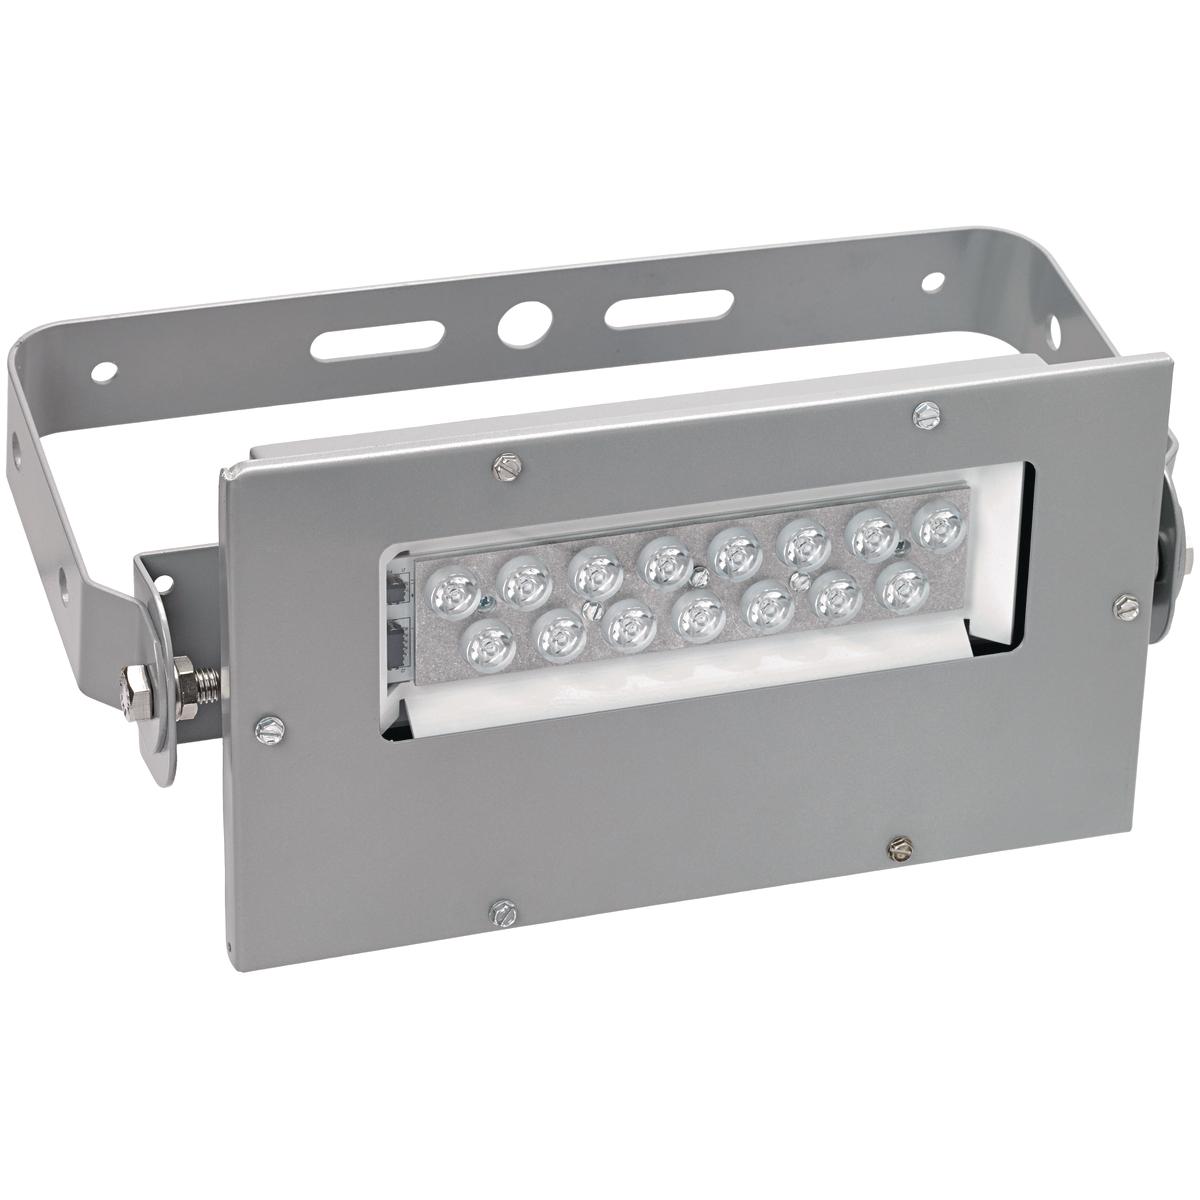 Hubbell KFLC4030-PL The KFLC Series compact LED floodlights are designed with a copper-free aluminum housing and painted with a powder epoxy finish for superior corrosion resistance in harsh and hazardous environments. Killark LED floodlights provide a crisp white light that